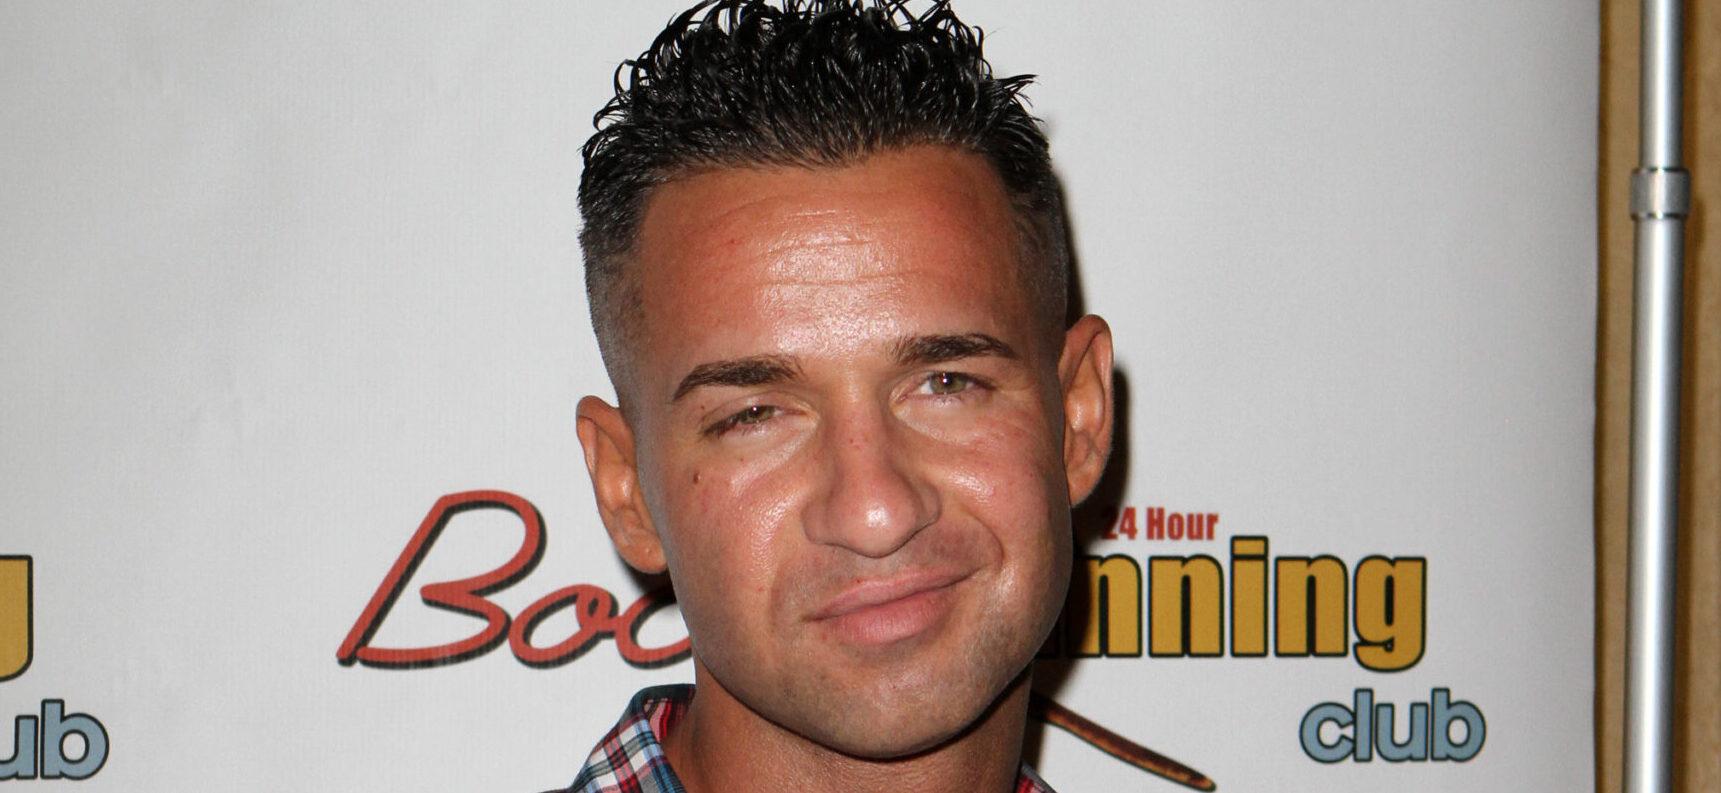 Mike ‘The Situation’ Sorrentino’s Tell-All Memoir Is Set For Fall Release